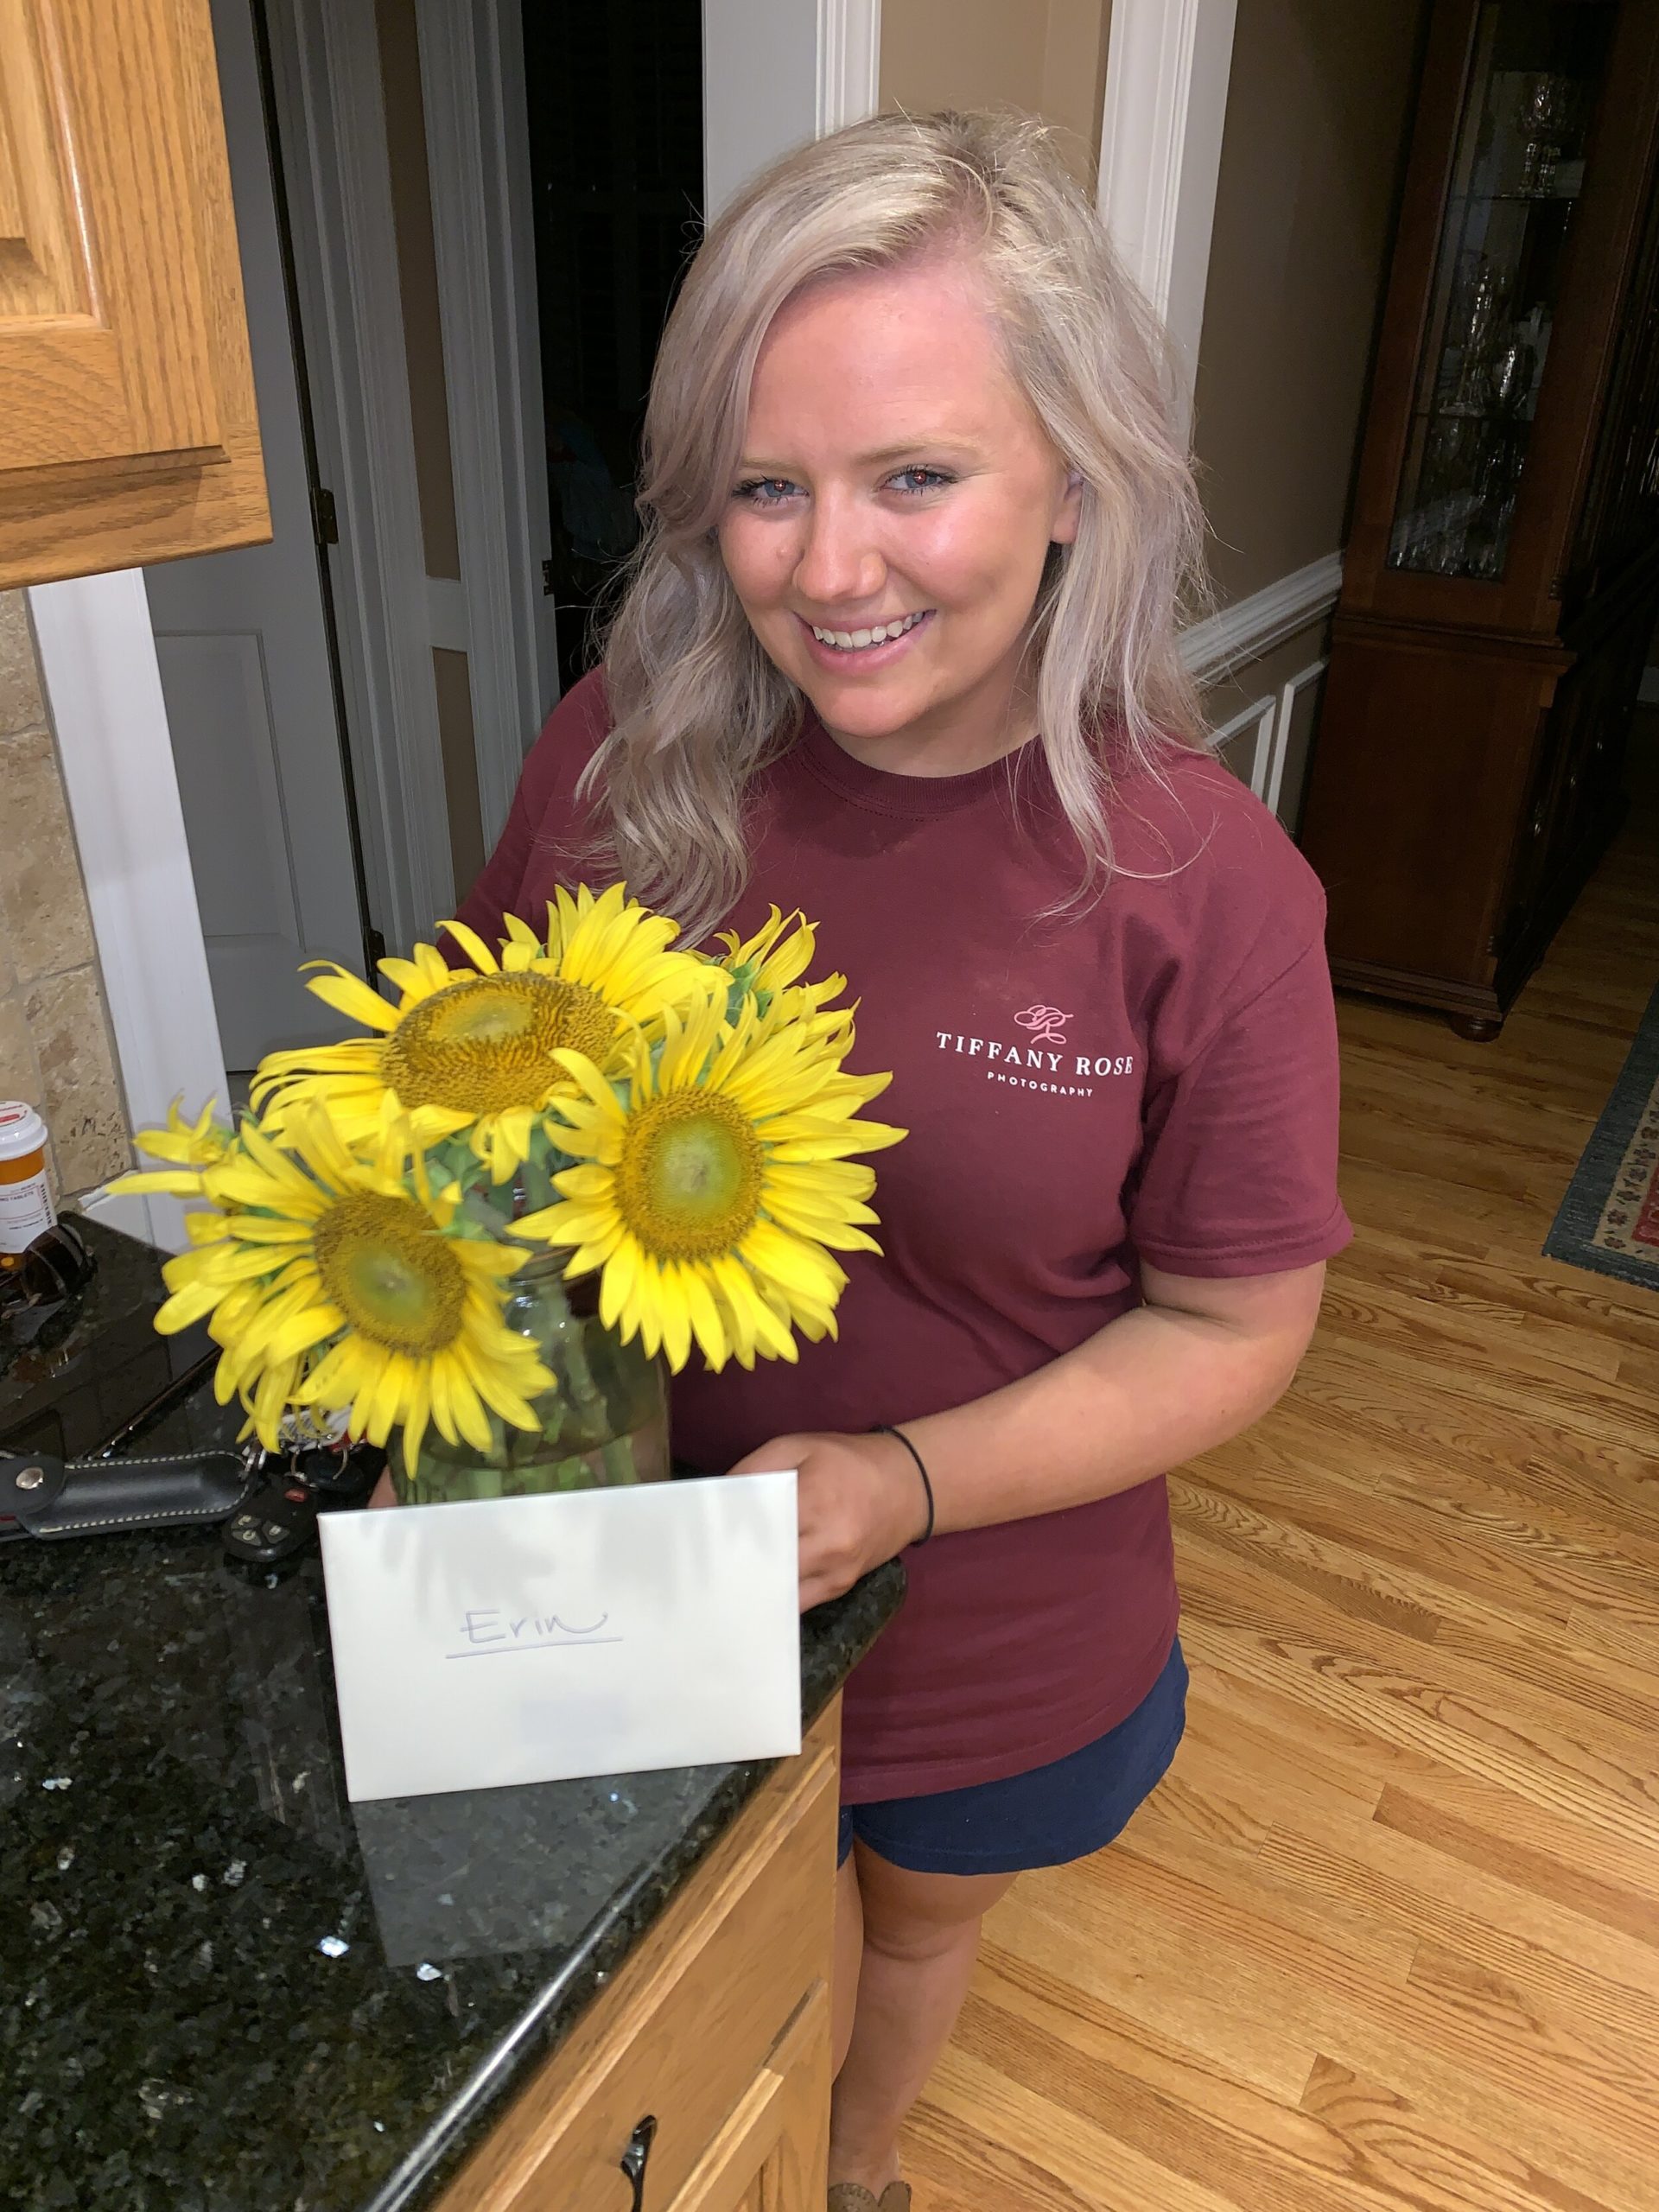  This beautiful girl came to my house at midnight, rode with my parents to church, jumped out of the car and surprised me with my favorite flowers. This girl is so thoughtful.  